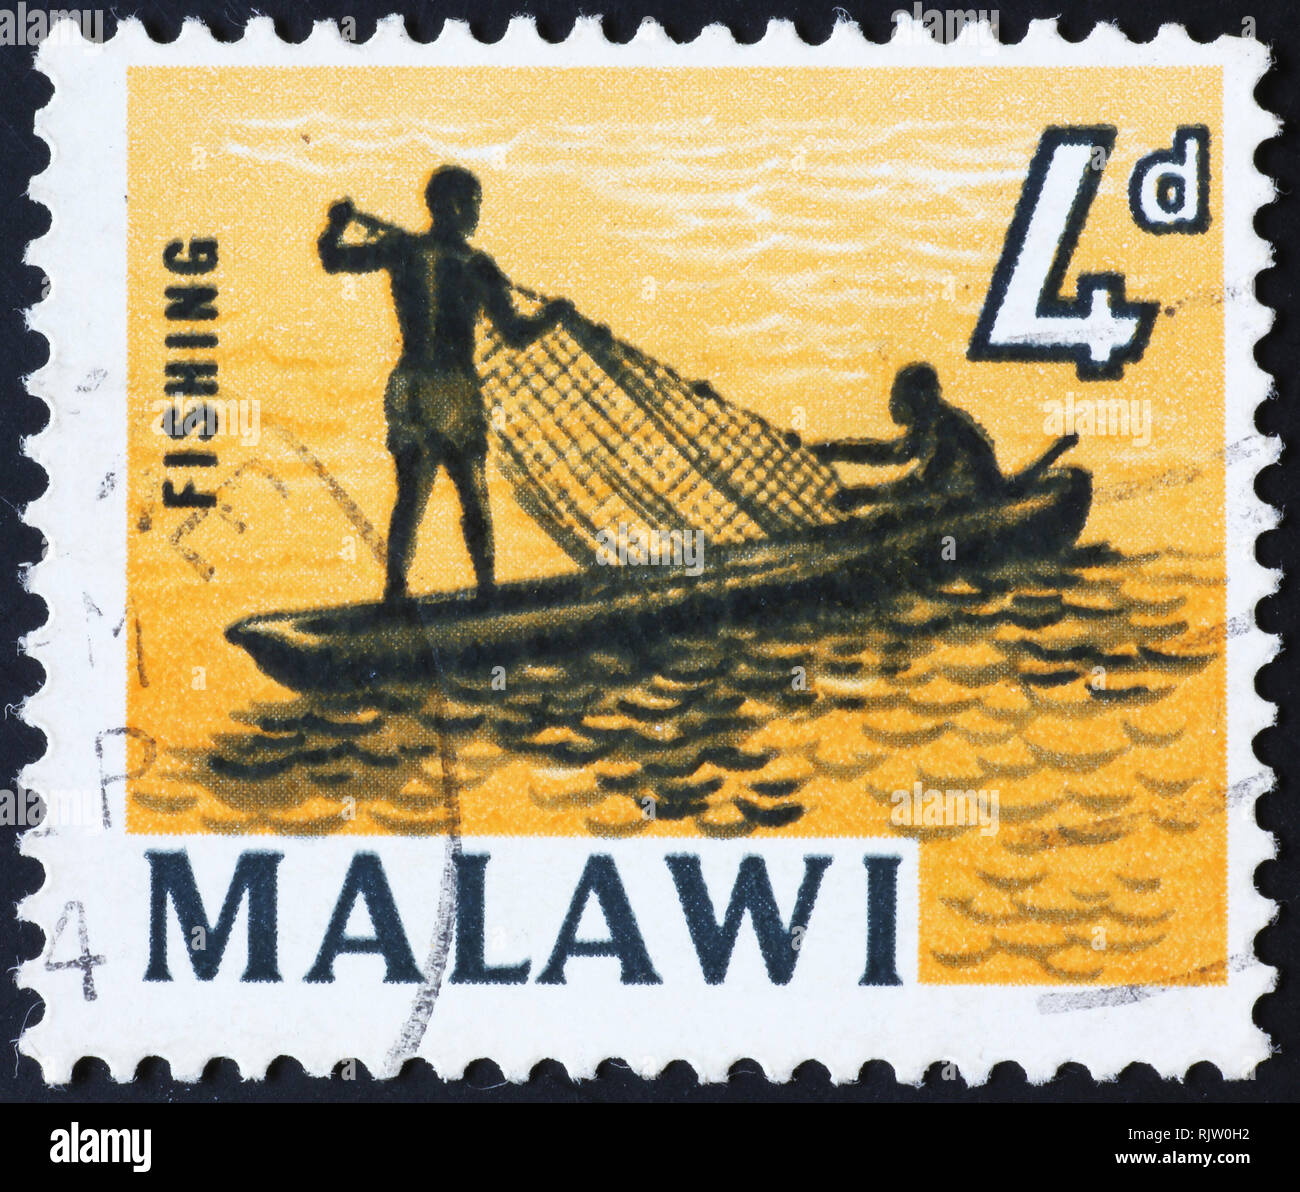 Fishermen on pirague in postage stamp of Malawi Stock Photo